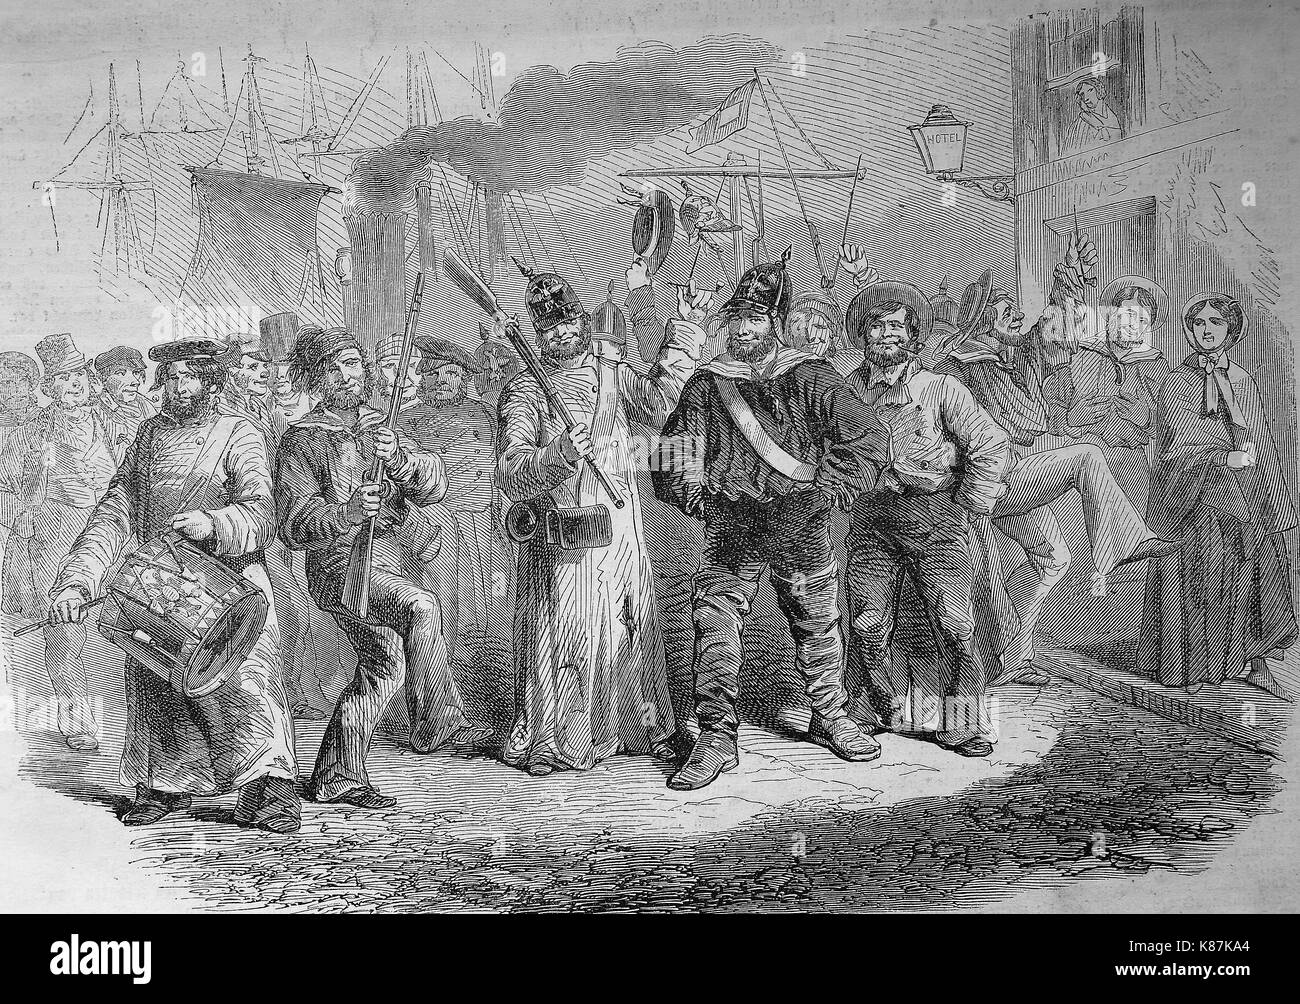 Sailors on shore leave pass through South Hampton, England, 1855, Digital improved reproduction of an original woodprint from the 19th century Stock Photo